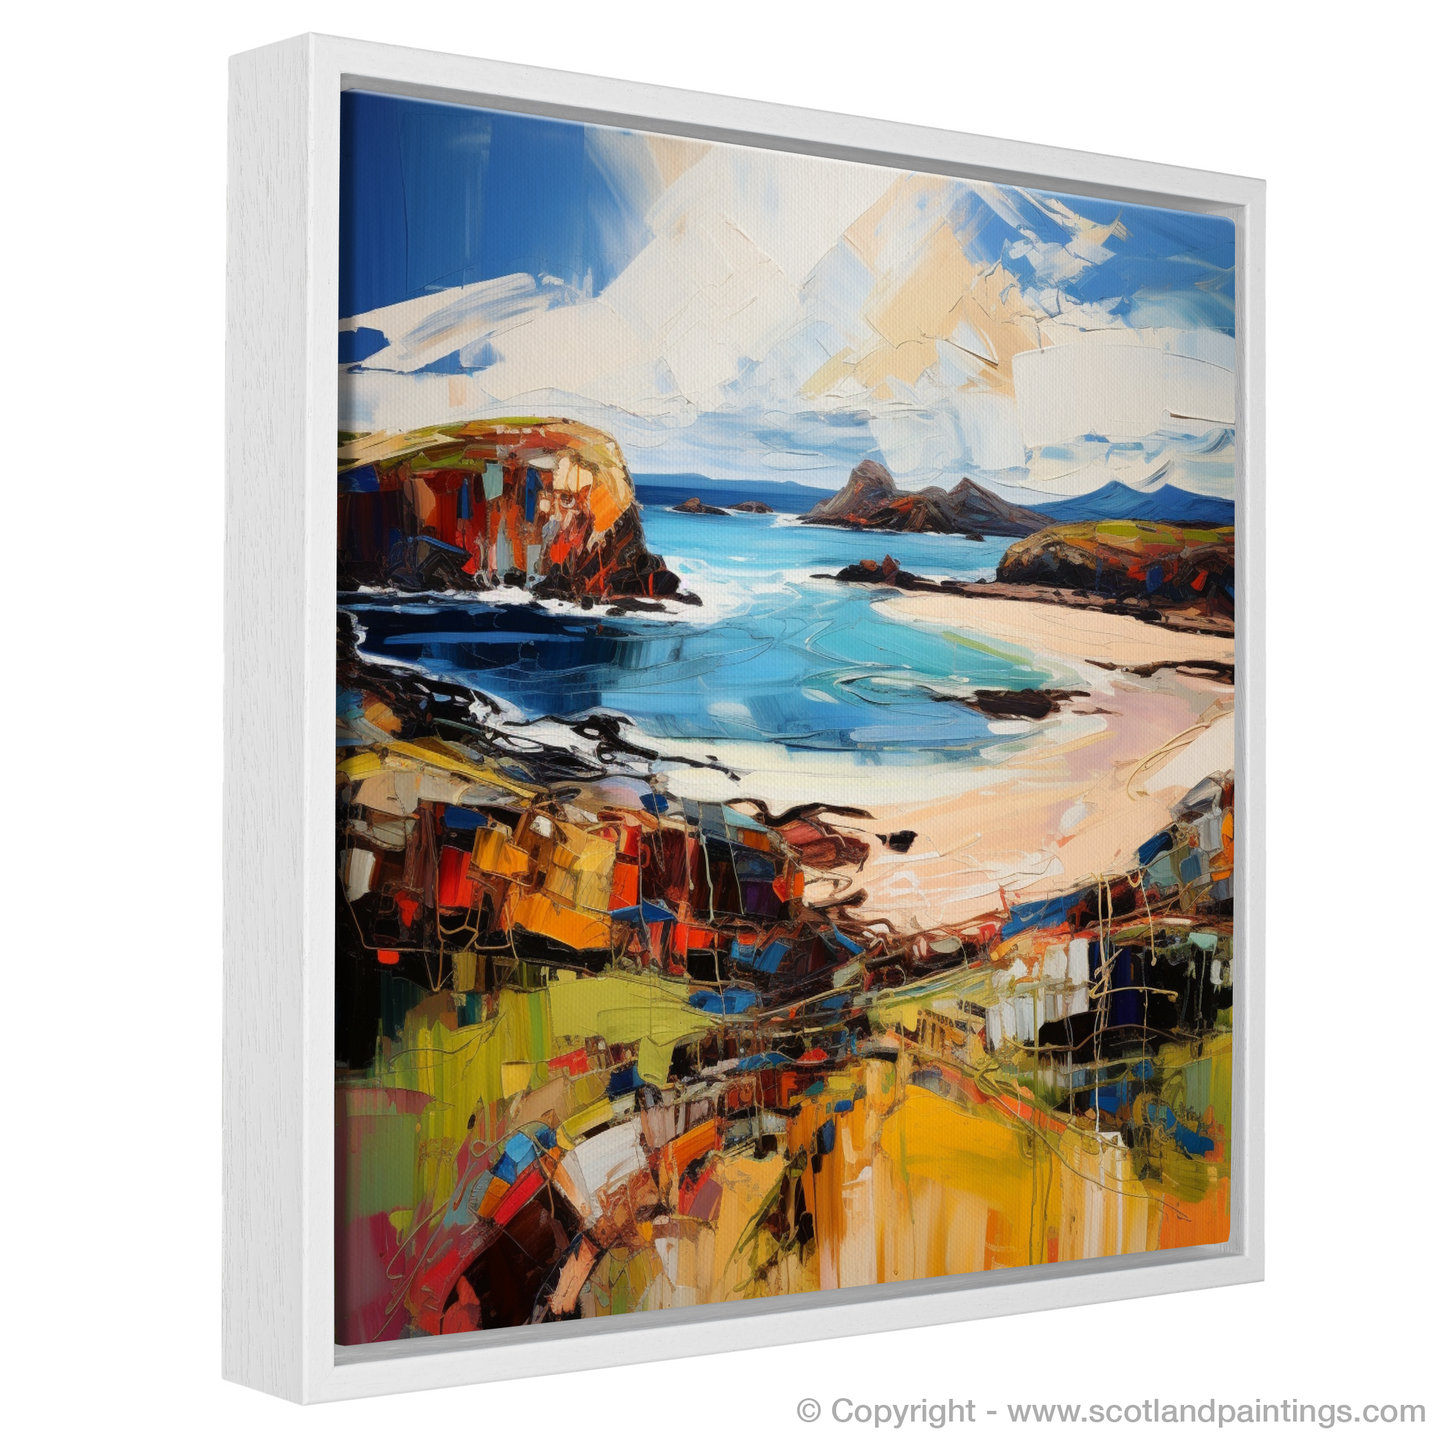 Painting and Art Print of Scourie Bay, Sutherland entitled "Embracing the Wild: Scourie Bay Expressionist Ode".